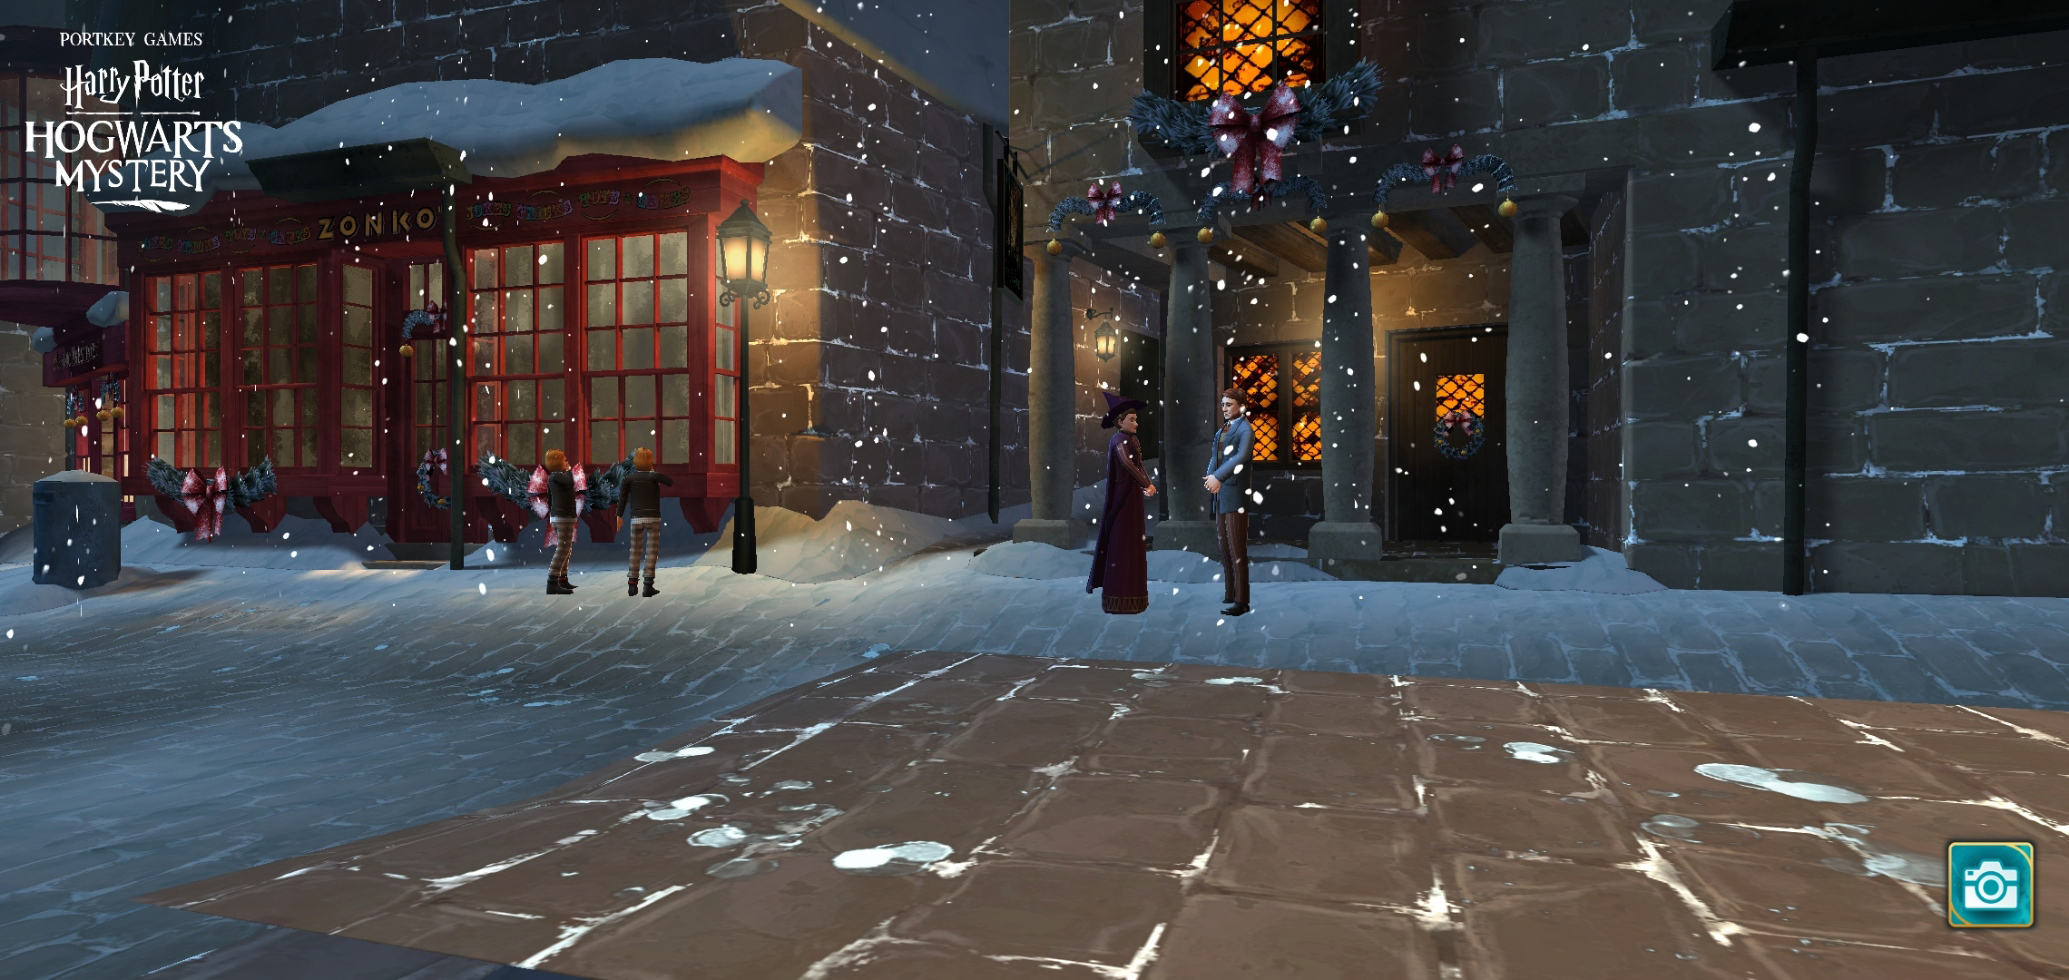 Even the Hog’s Head Inn looks warm and inviting in the latest “Harry Potter: Hogwarts Mystery” update.